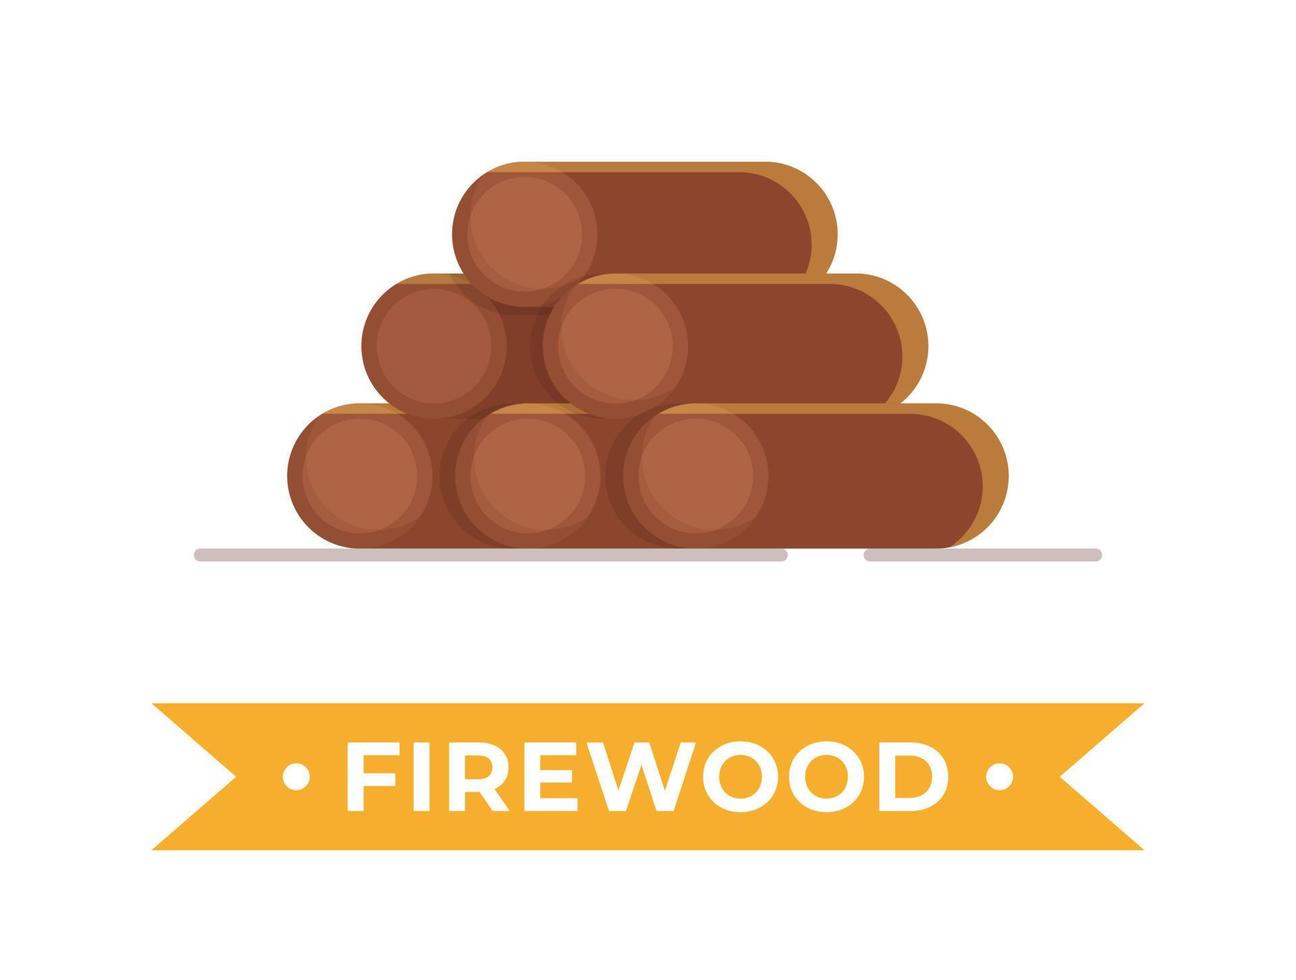 Vector illustration of firewood. Preparing to build a fire.